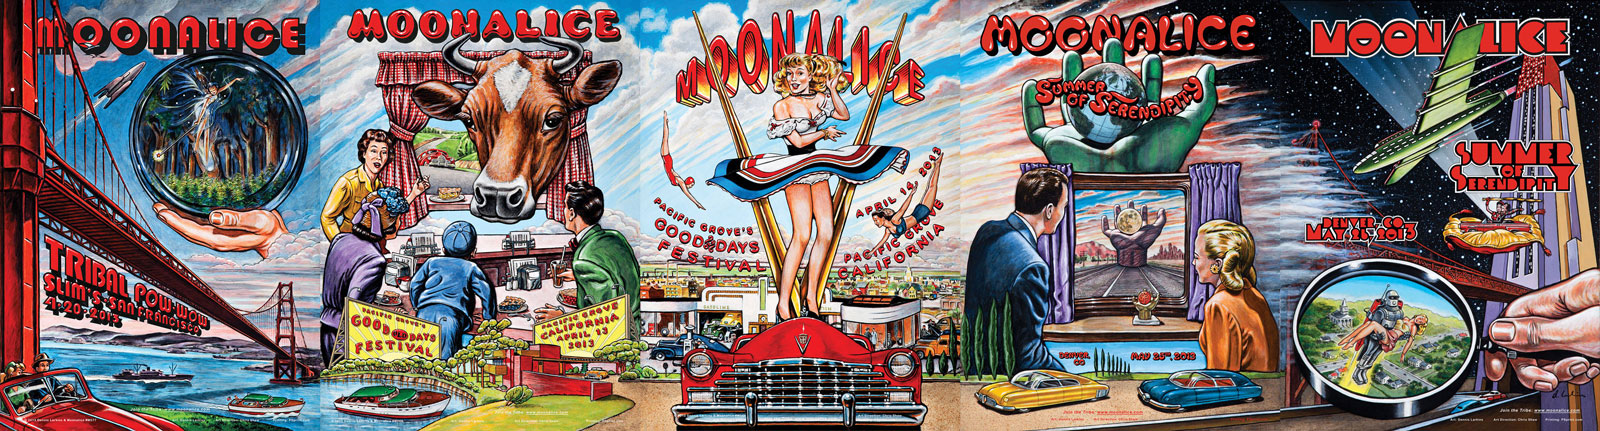 Moonalice pentaptych poster by Dennis Larkins